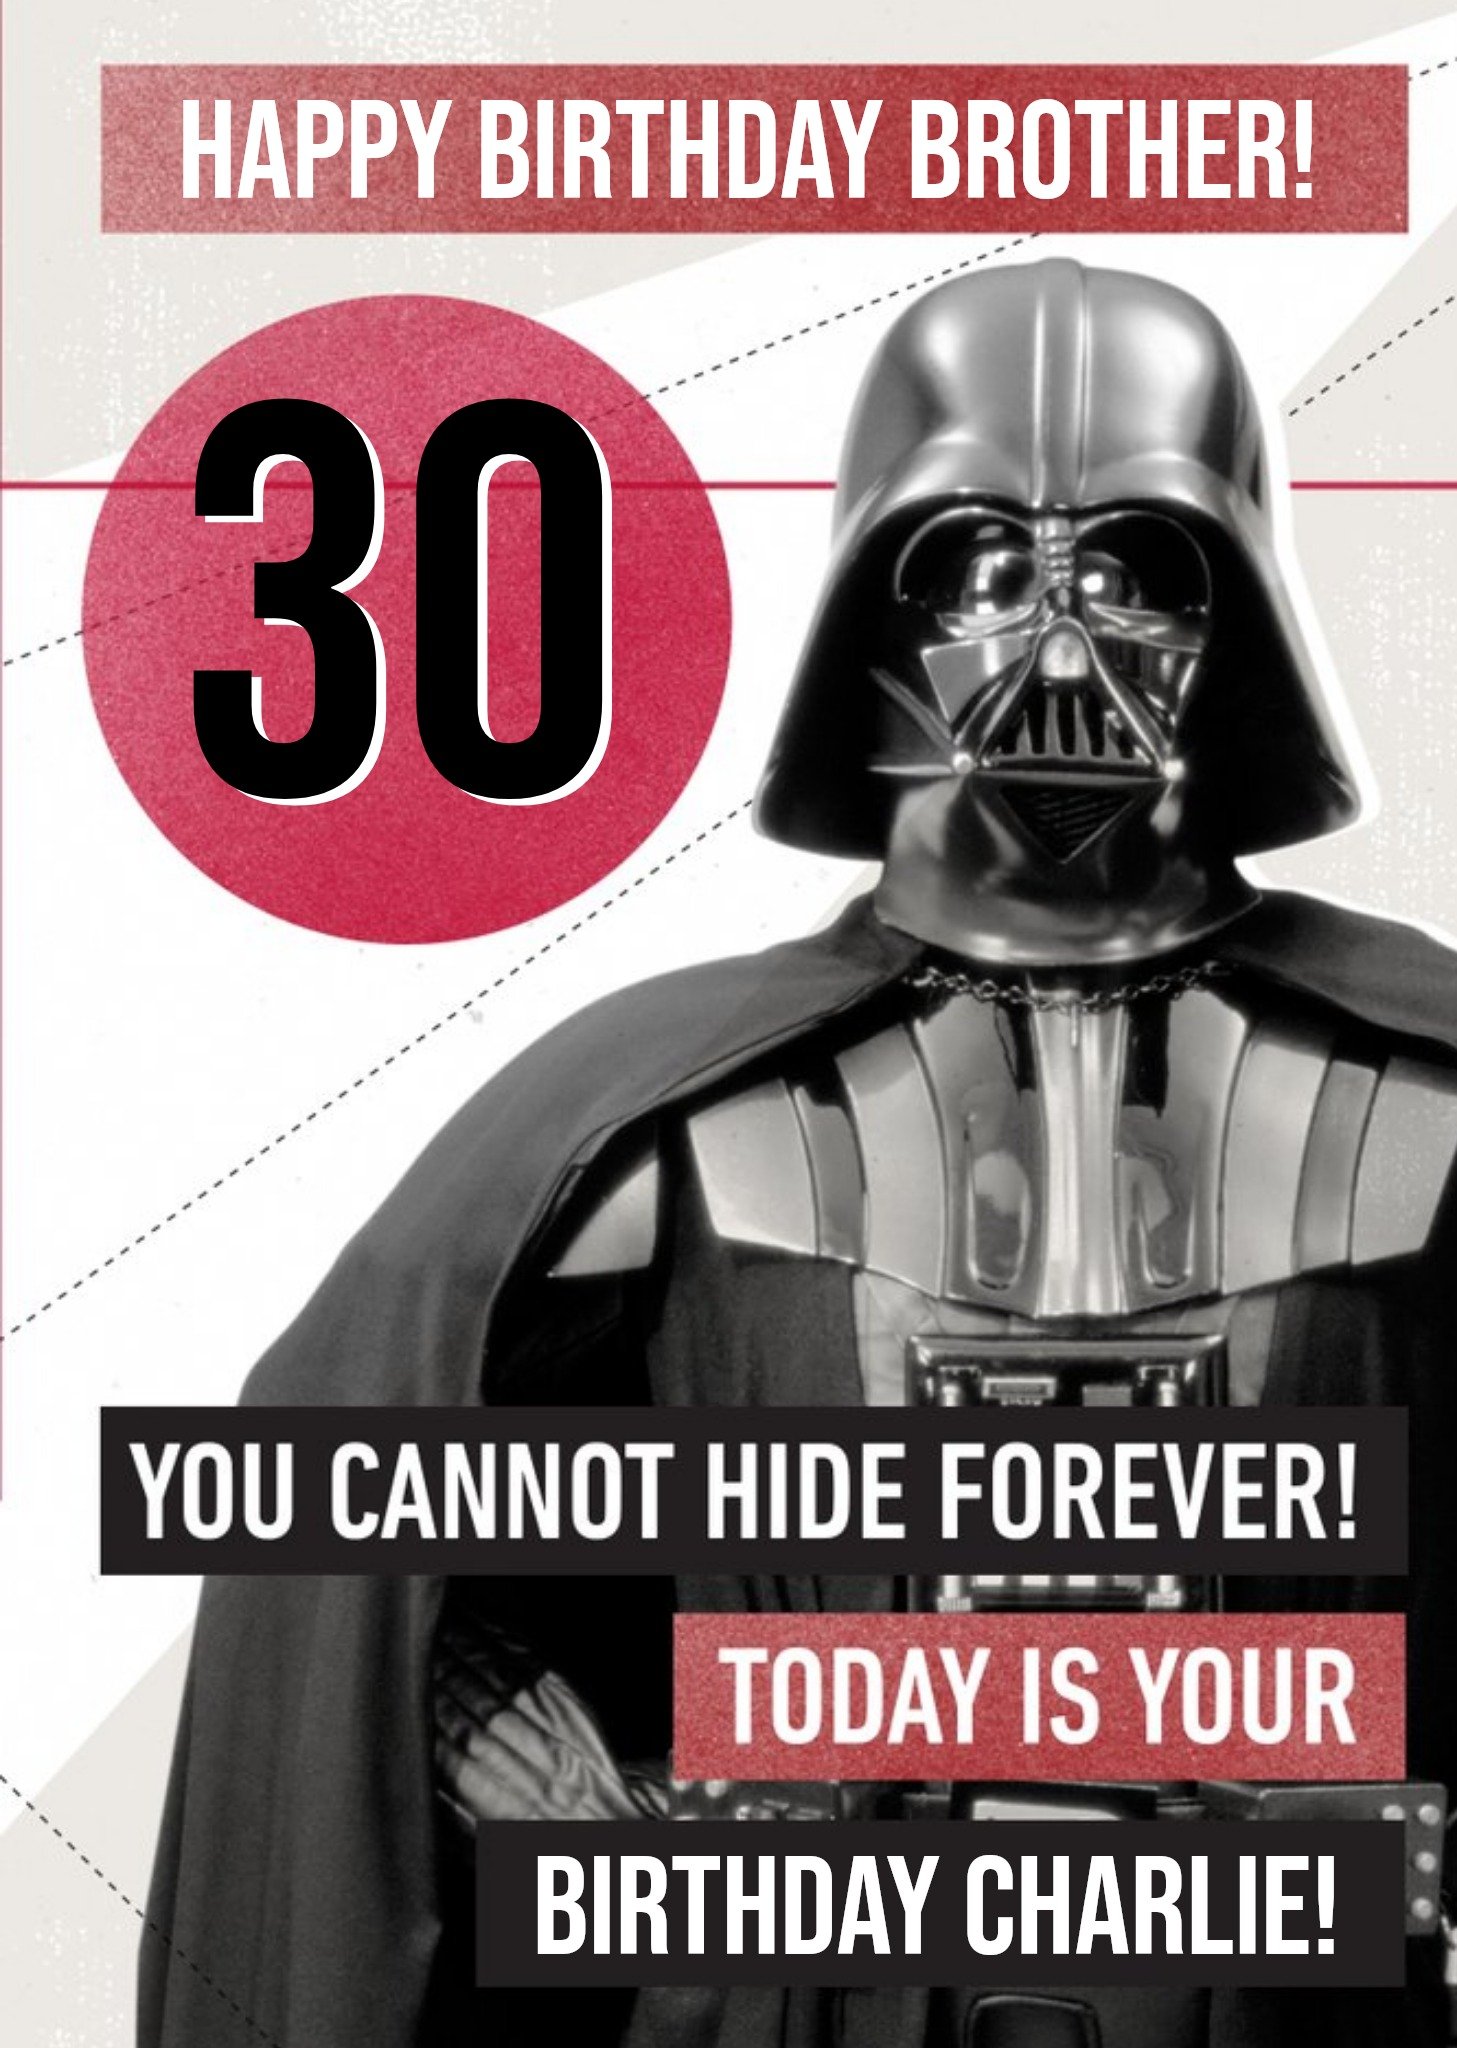 Disney Star Wars Darth Vader 30th Birthday Card For Brother, Large